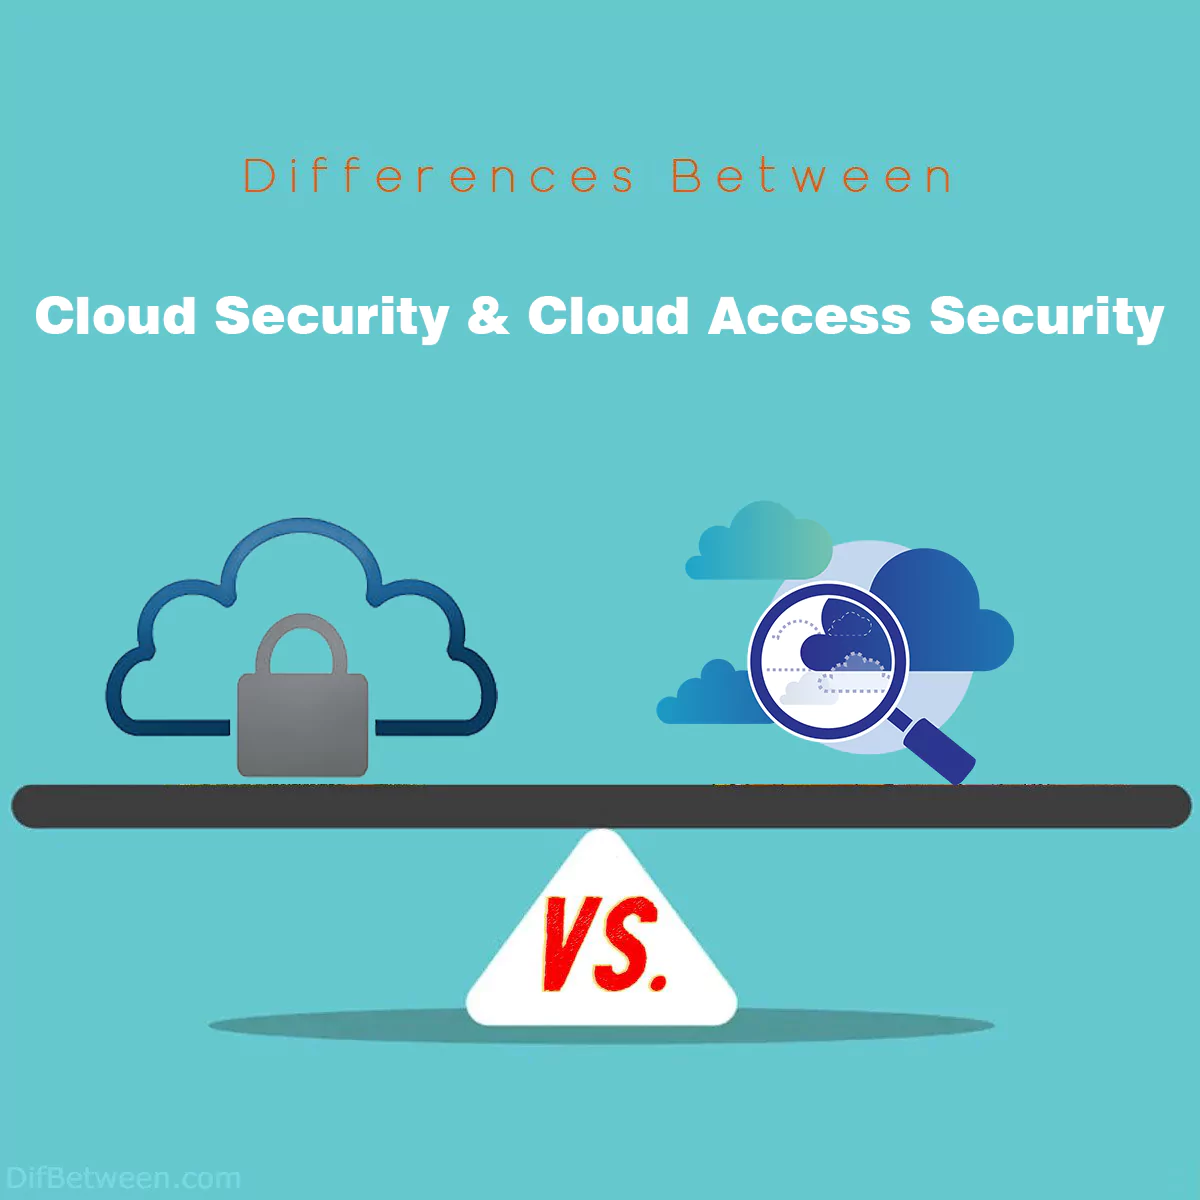 Differences Between Cloud Security and Cloud Access Security